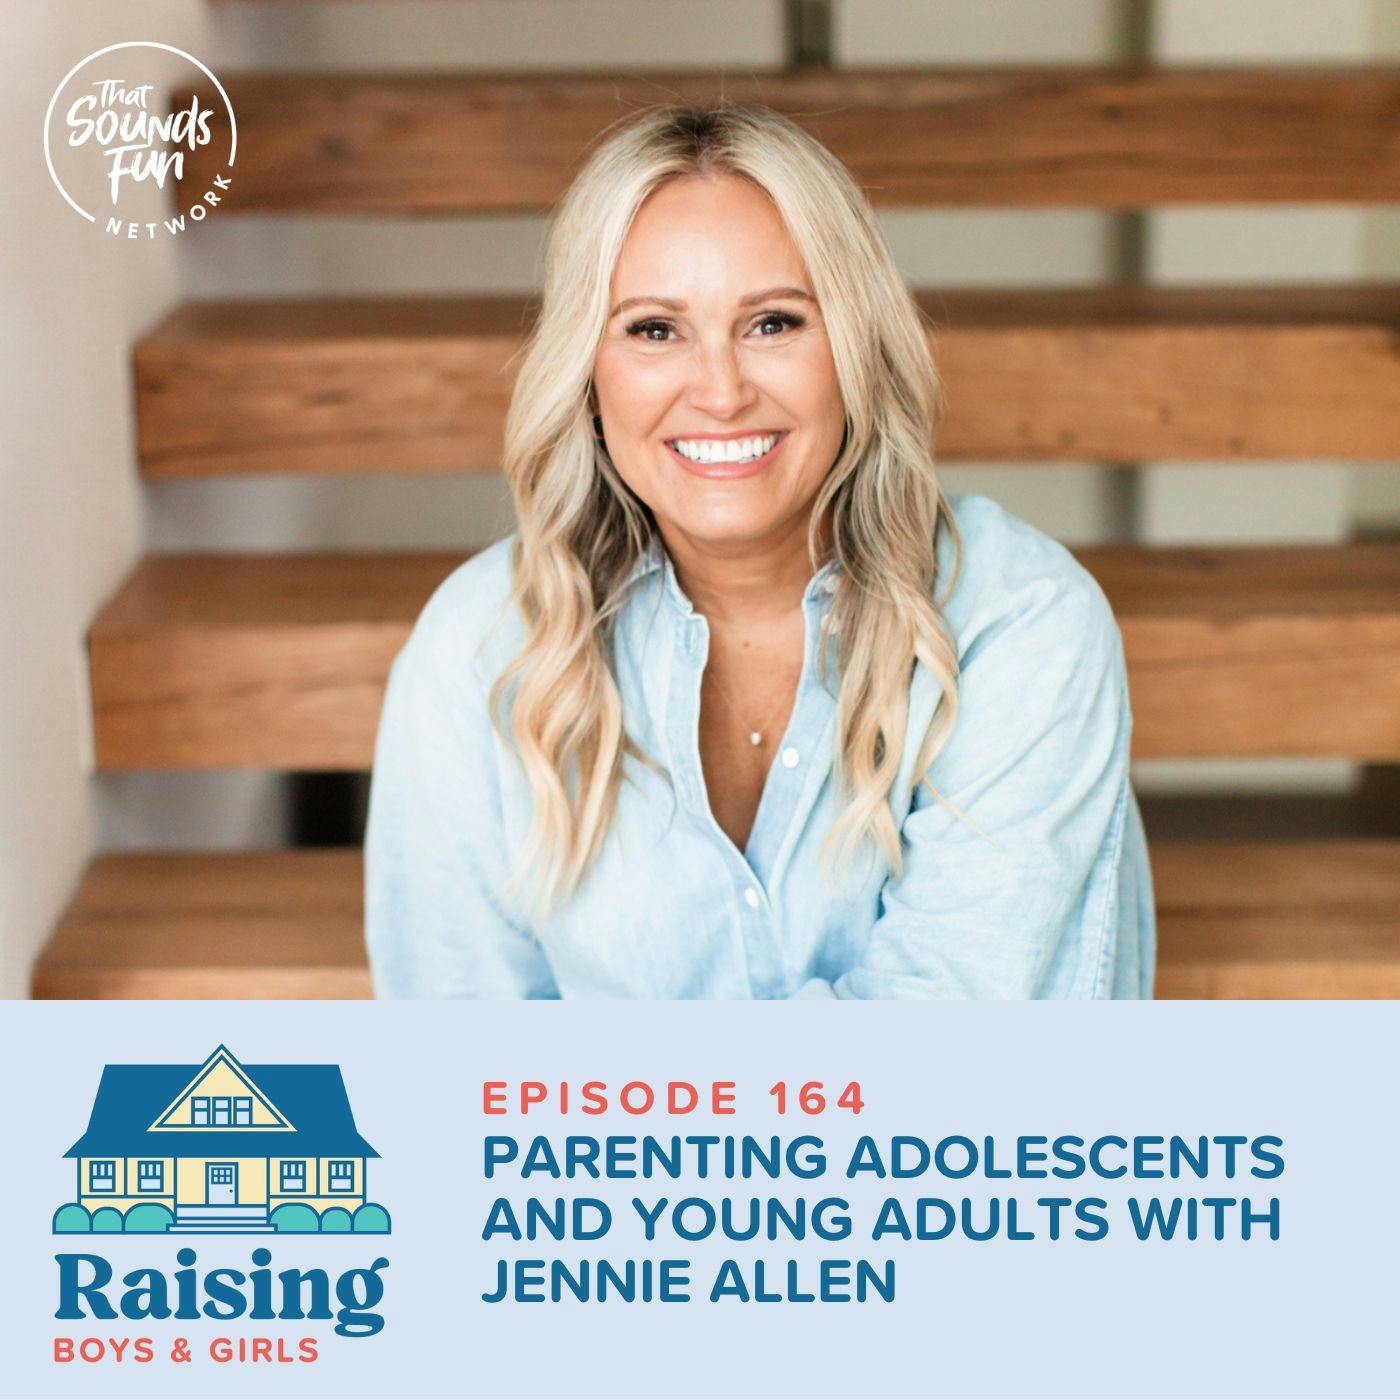 Episode 164: Parenting Adolescents and Young Adults with Jennie Allen